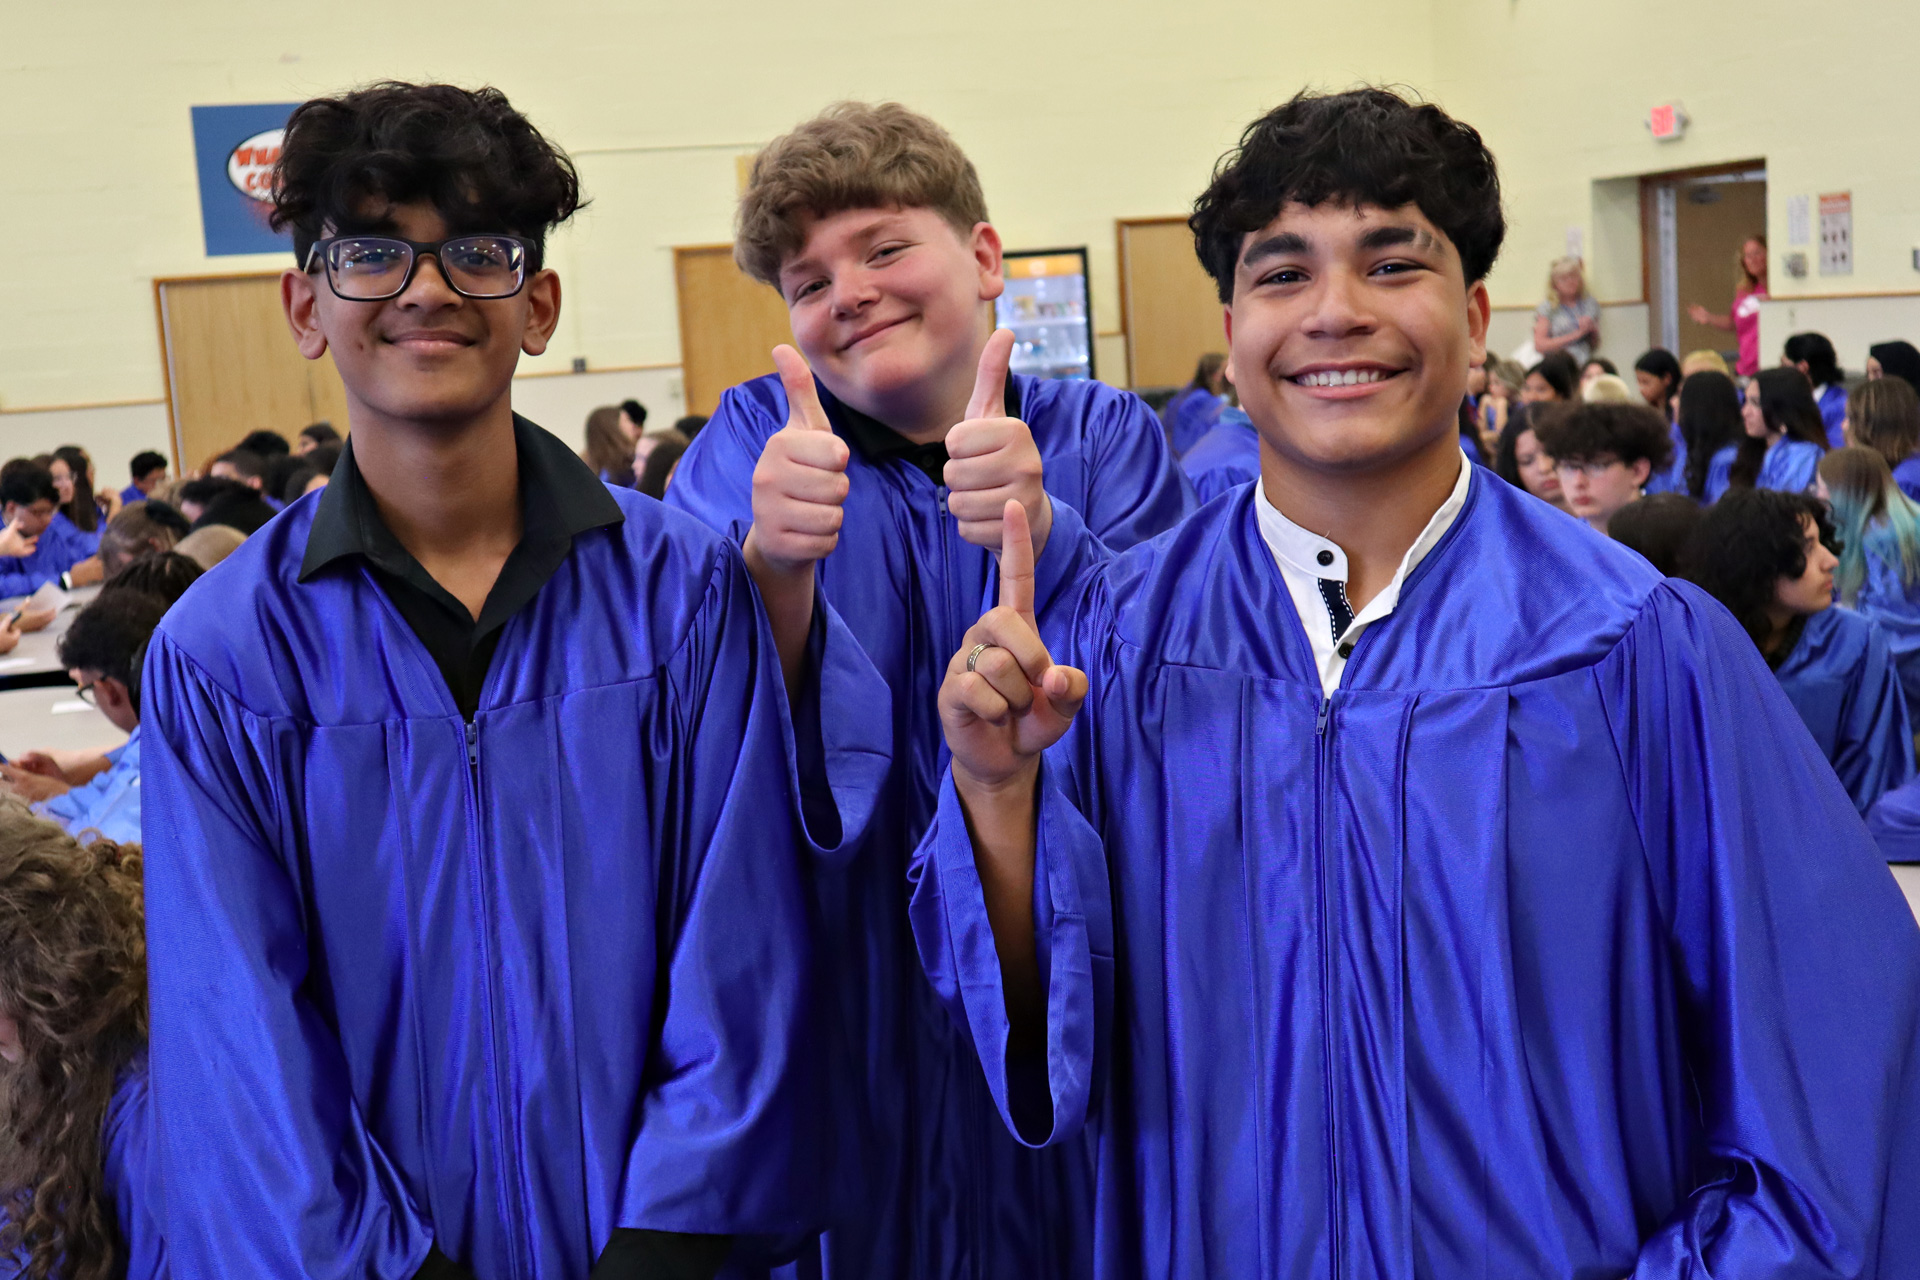 Before the ceremony began, students showed their excitement.